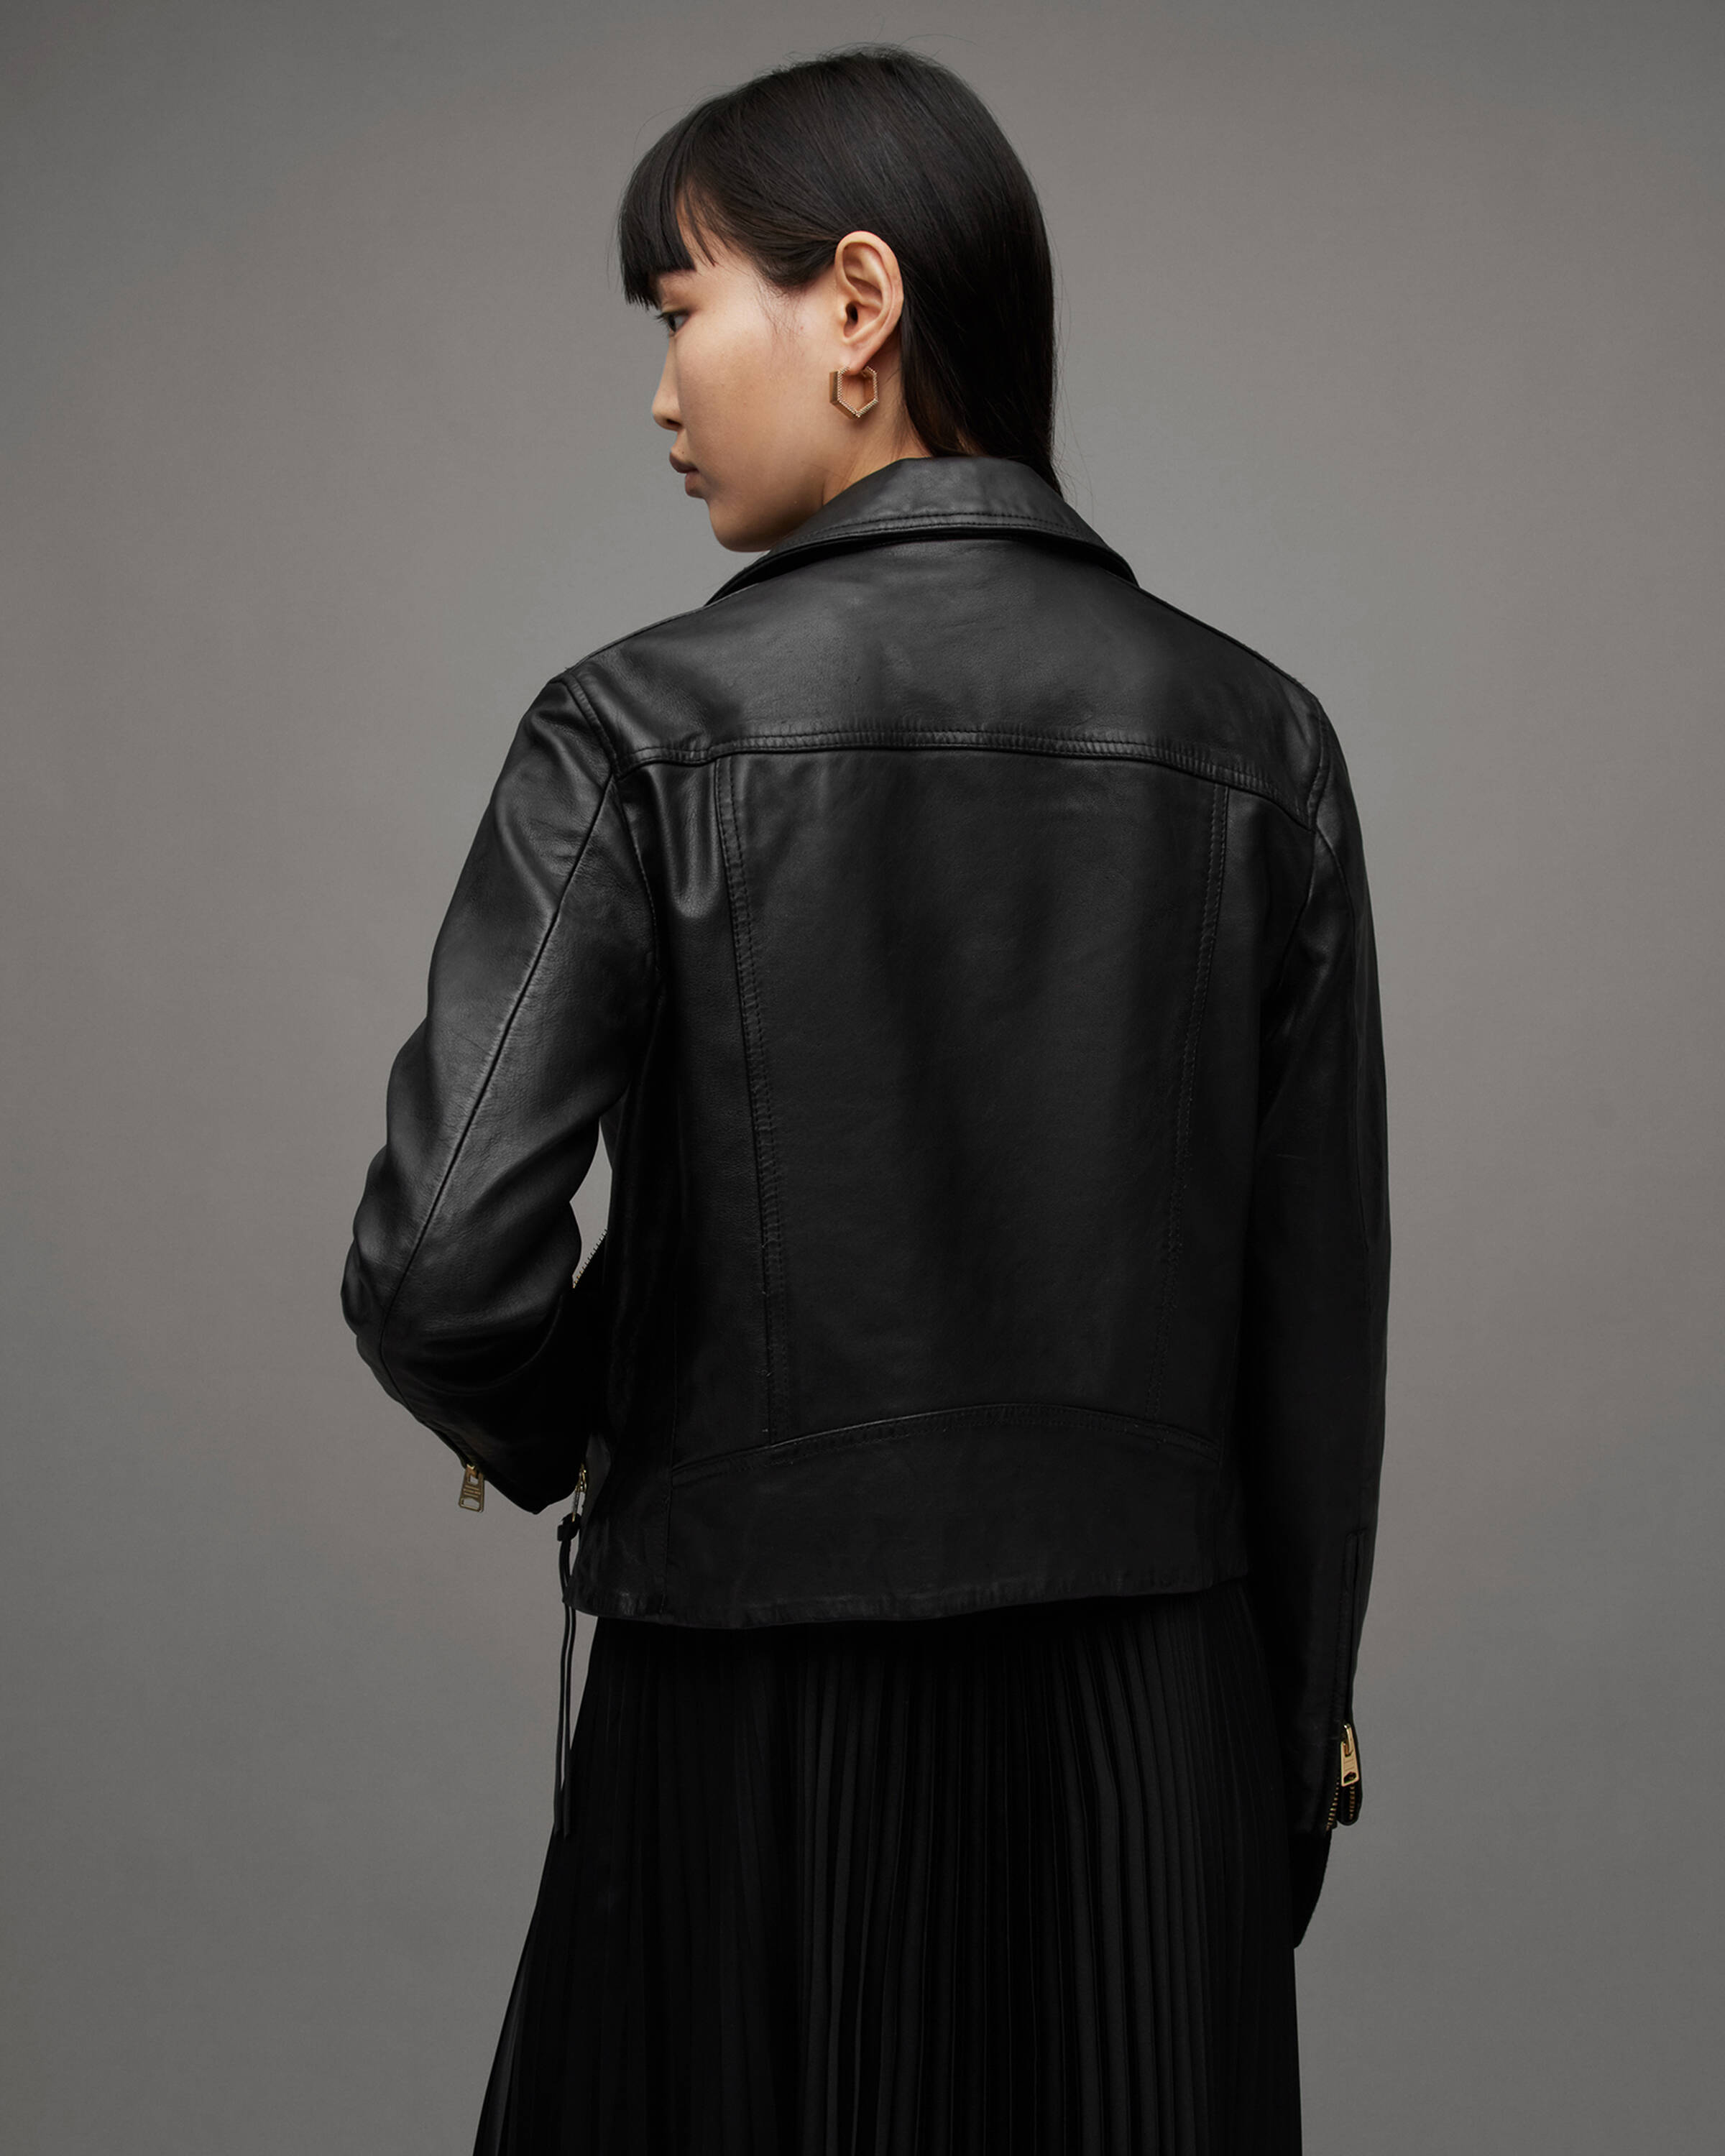 Women's Leather Size Guide  How to Wear Leather Jackets